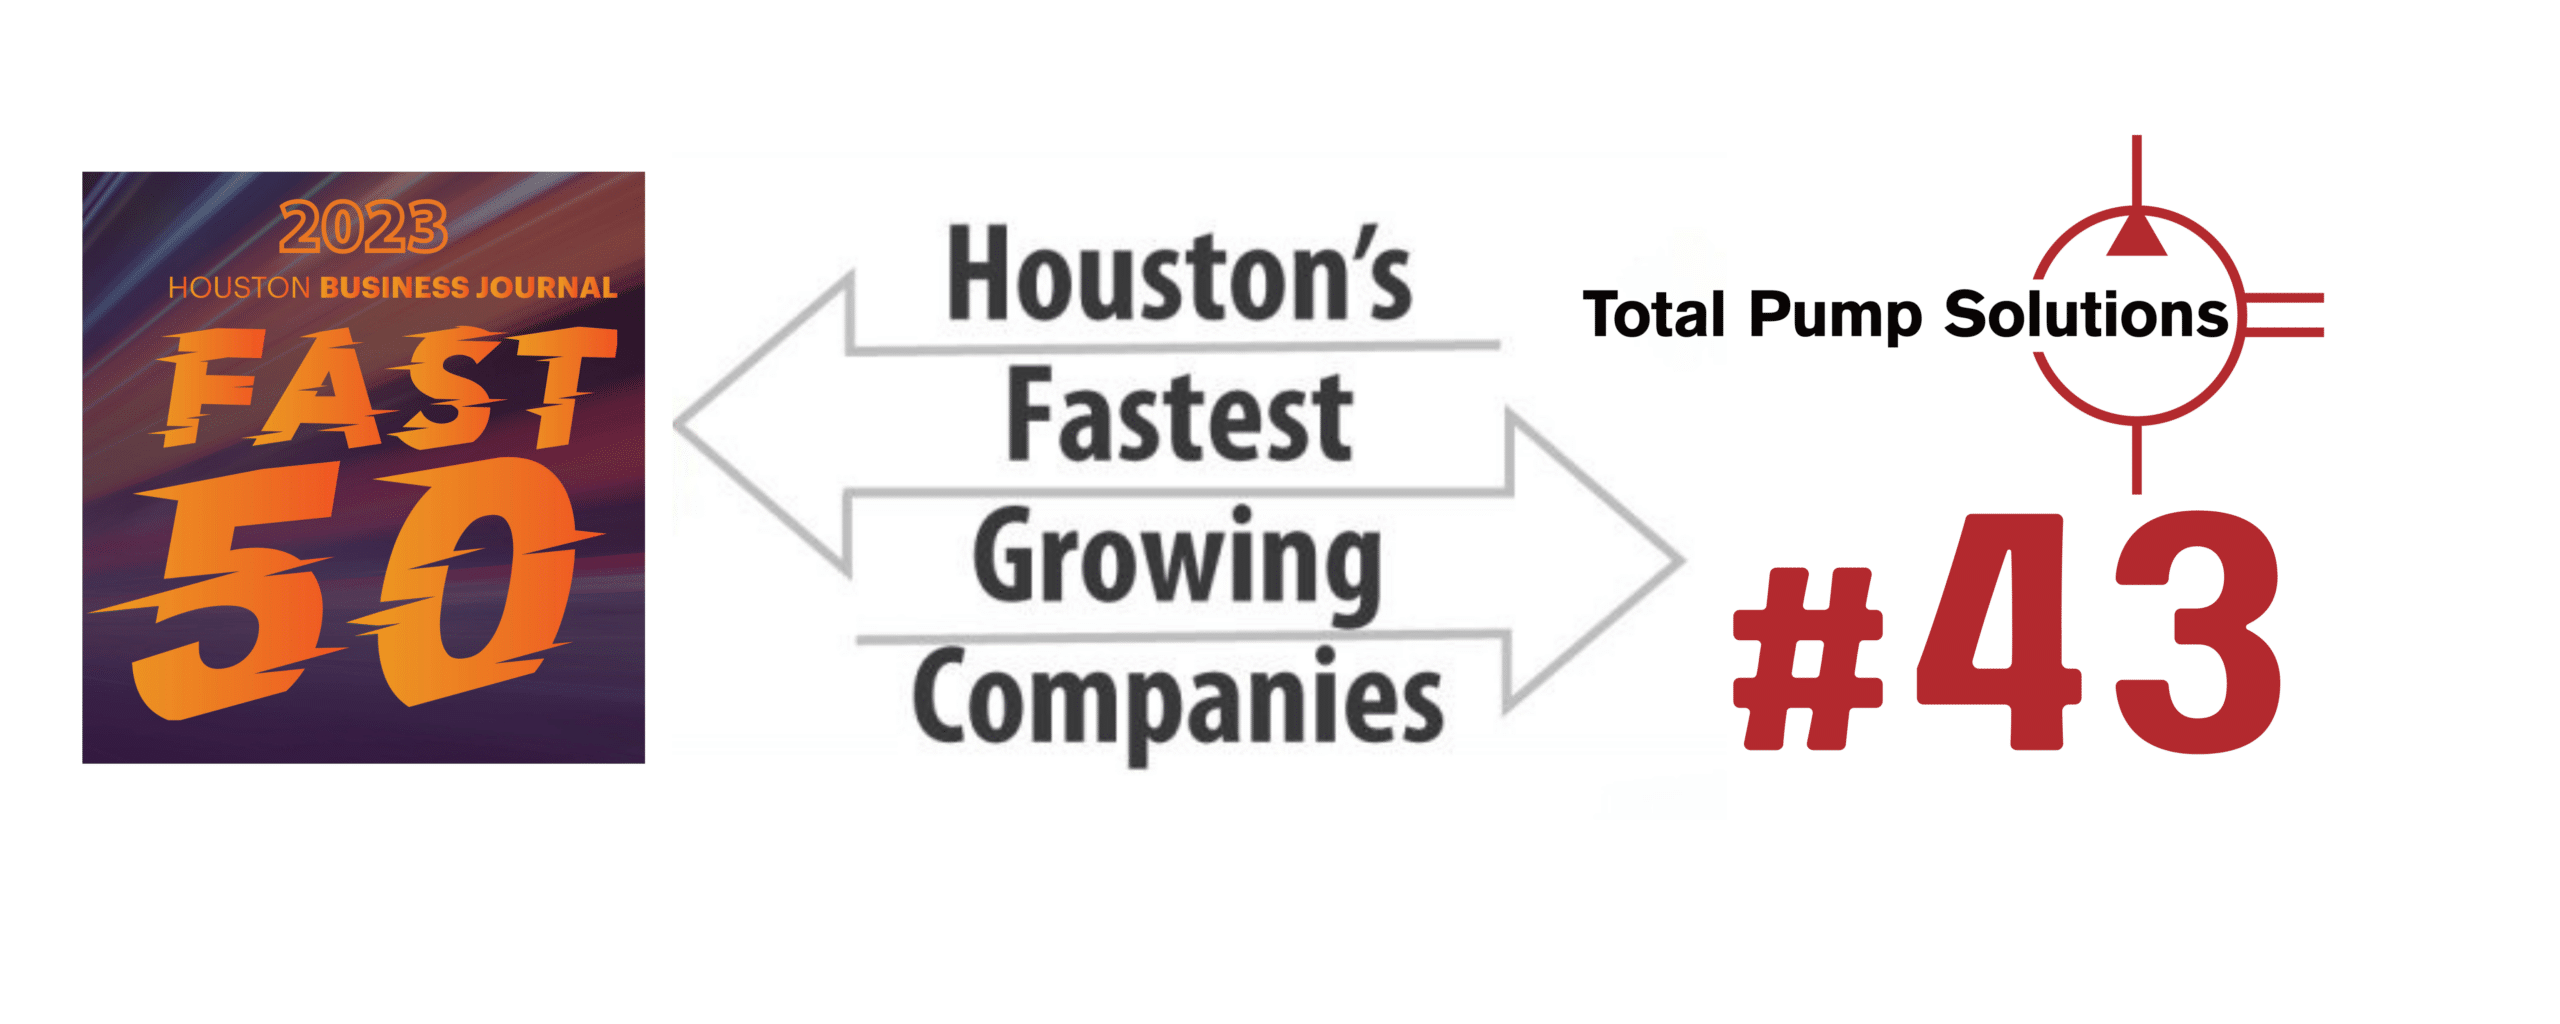 Total Pump Solutions Recognized as A Trusted Leader in Houston’s Fire Protection Landscape